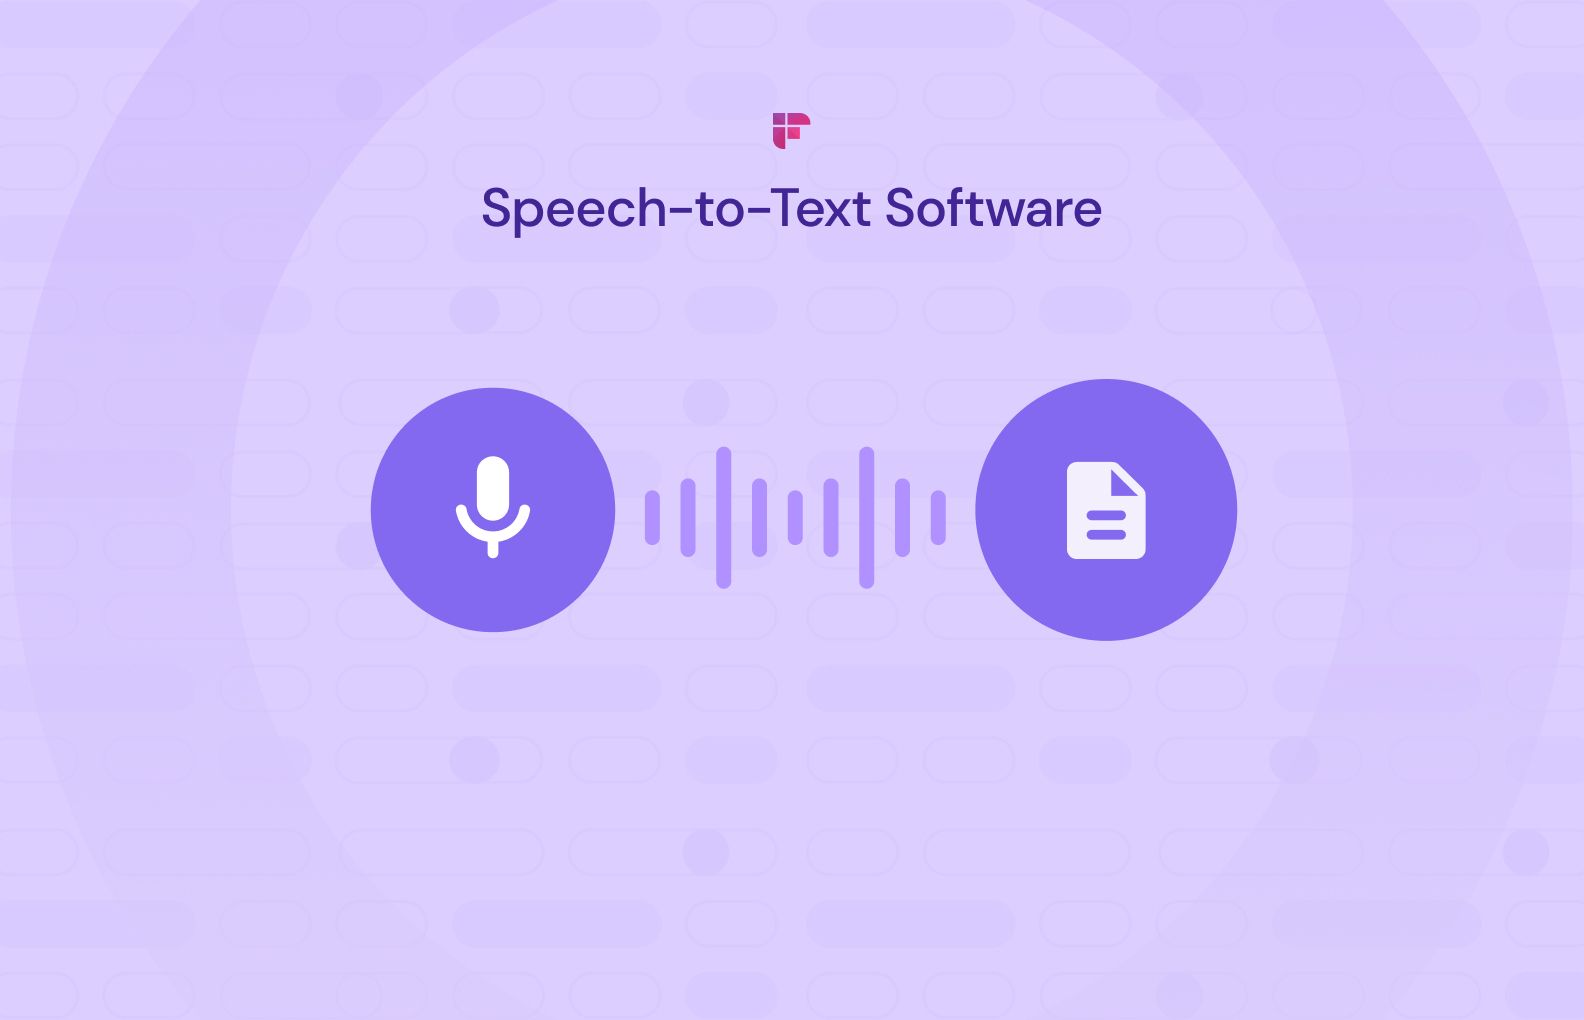 text to speech software means